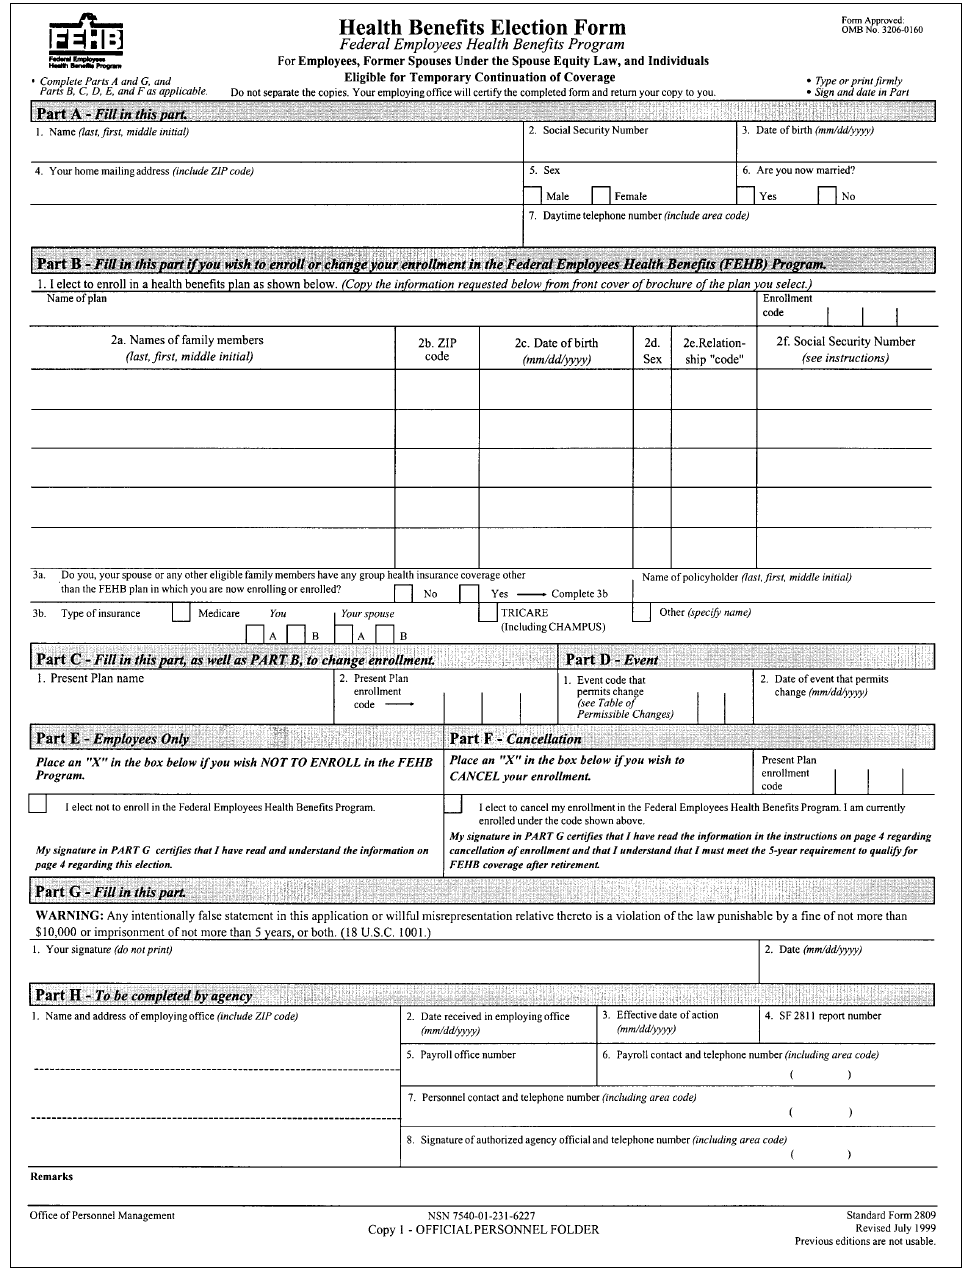 form-sf-2809-health-benefits-election-form